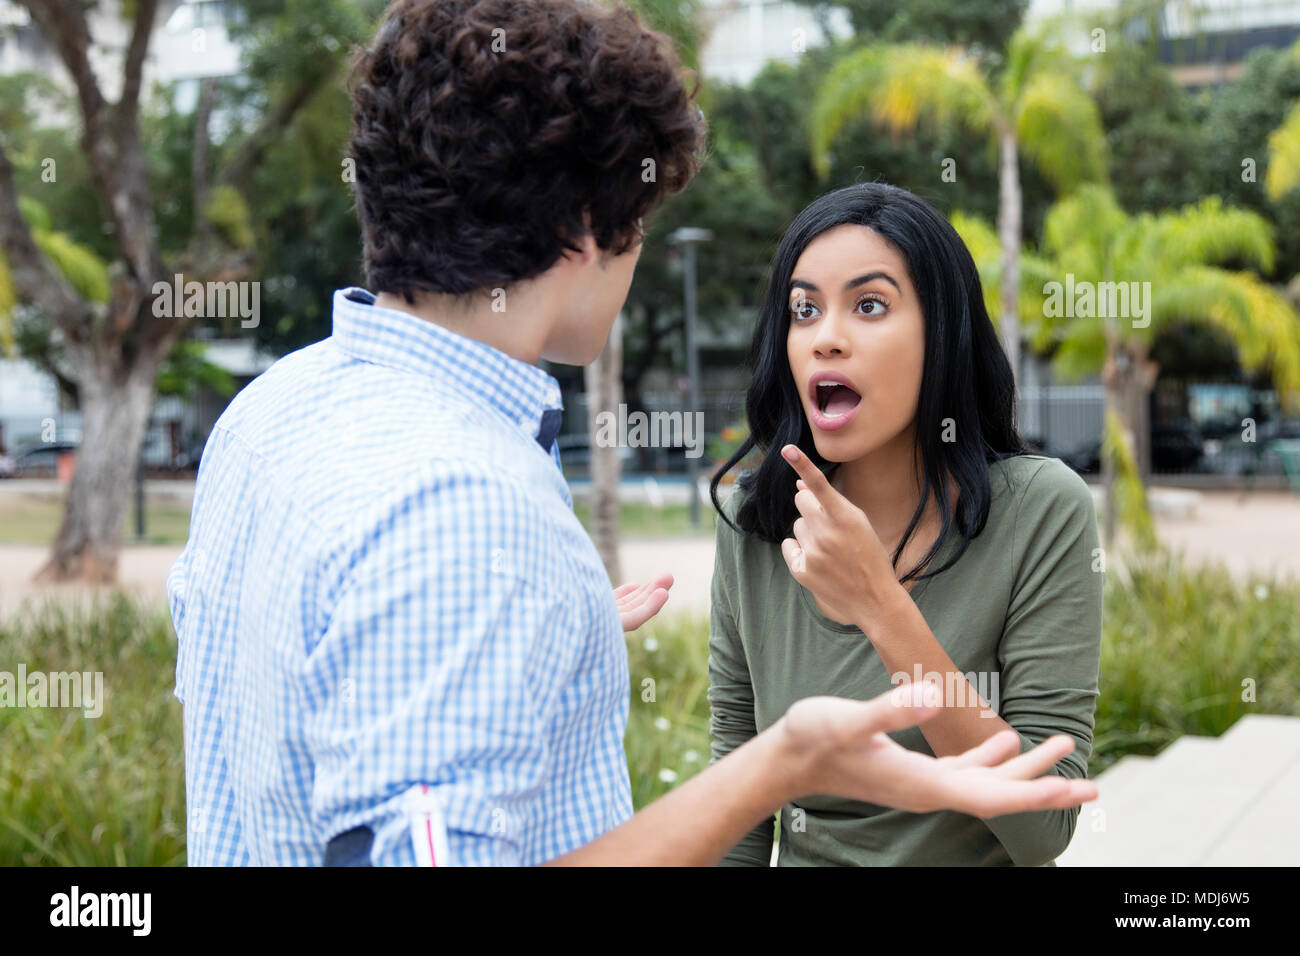 Shocked young woman with boyfriend outdoors in the city Stock Photo